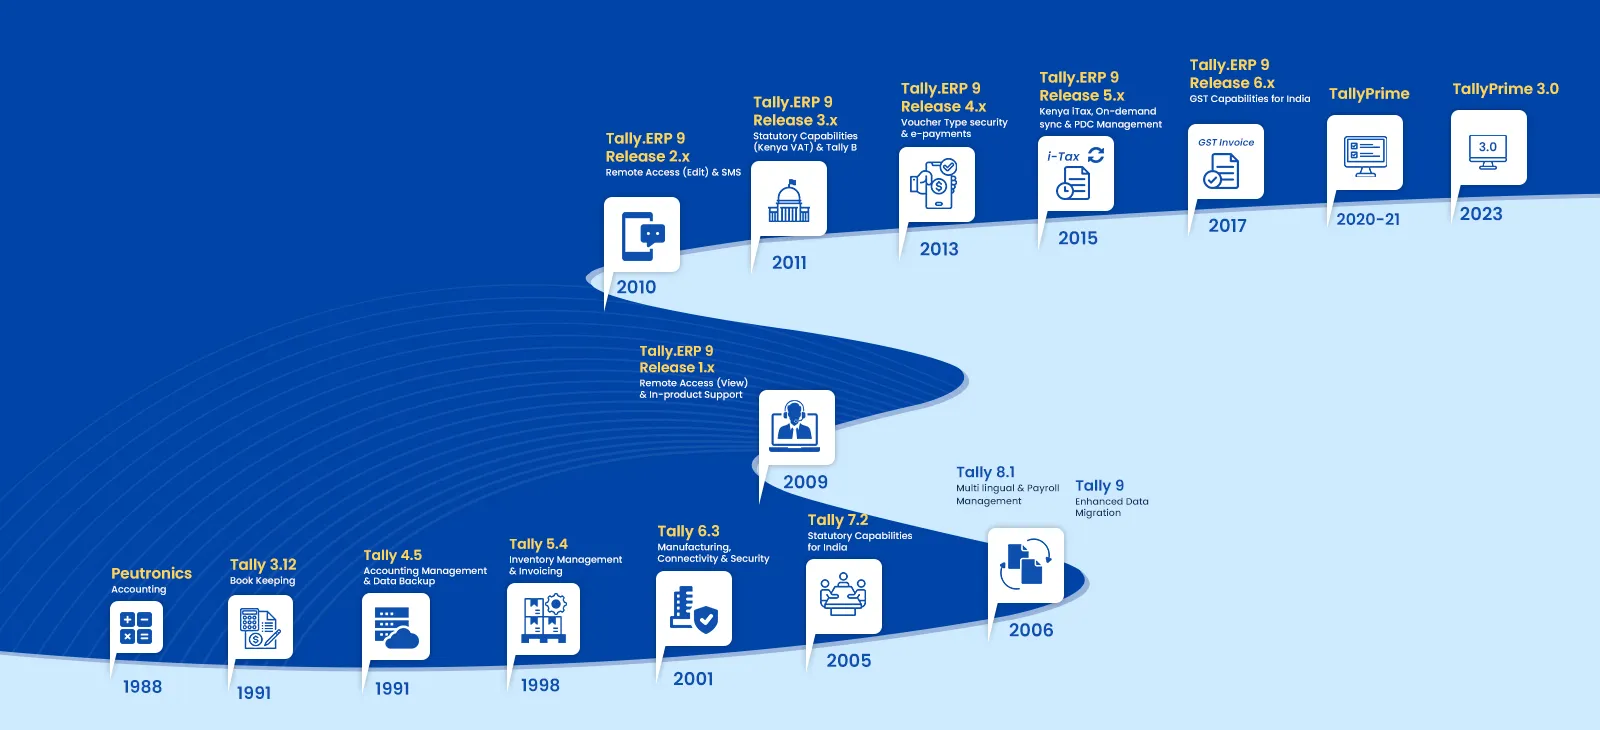 Timeline of the first version of the tallysolution product, Peutronics, from 1988 to 2005.